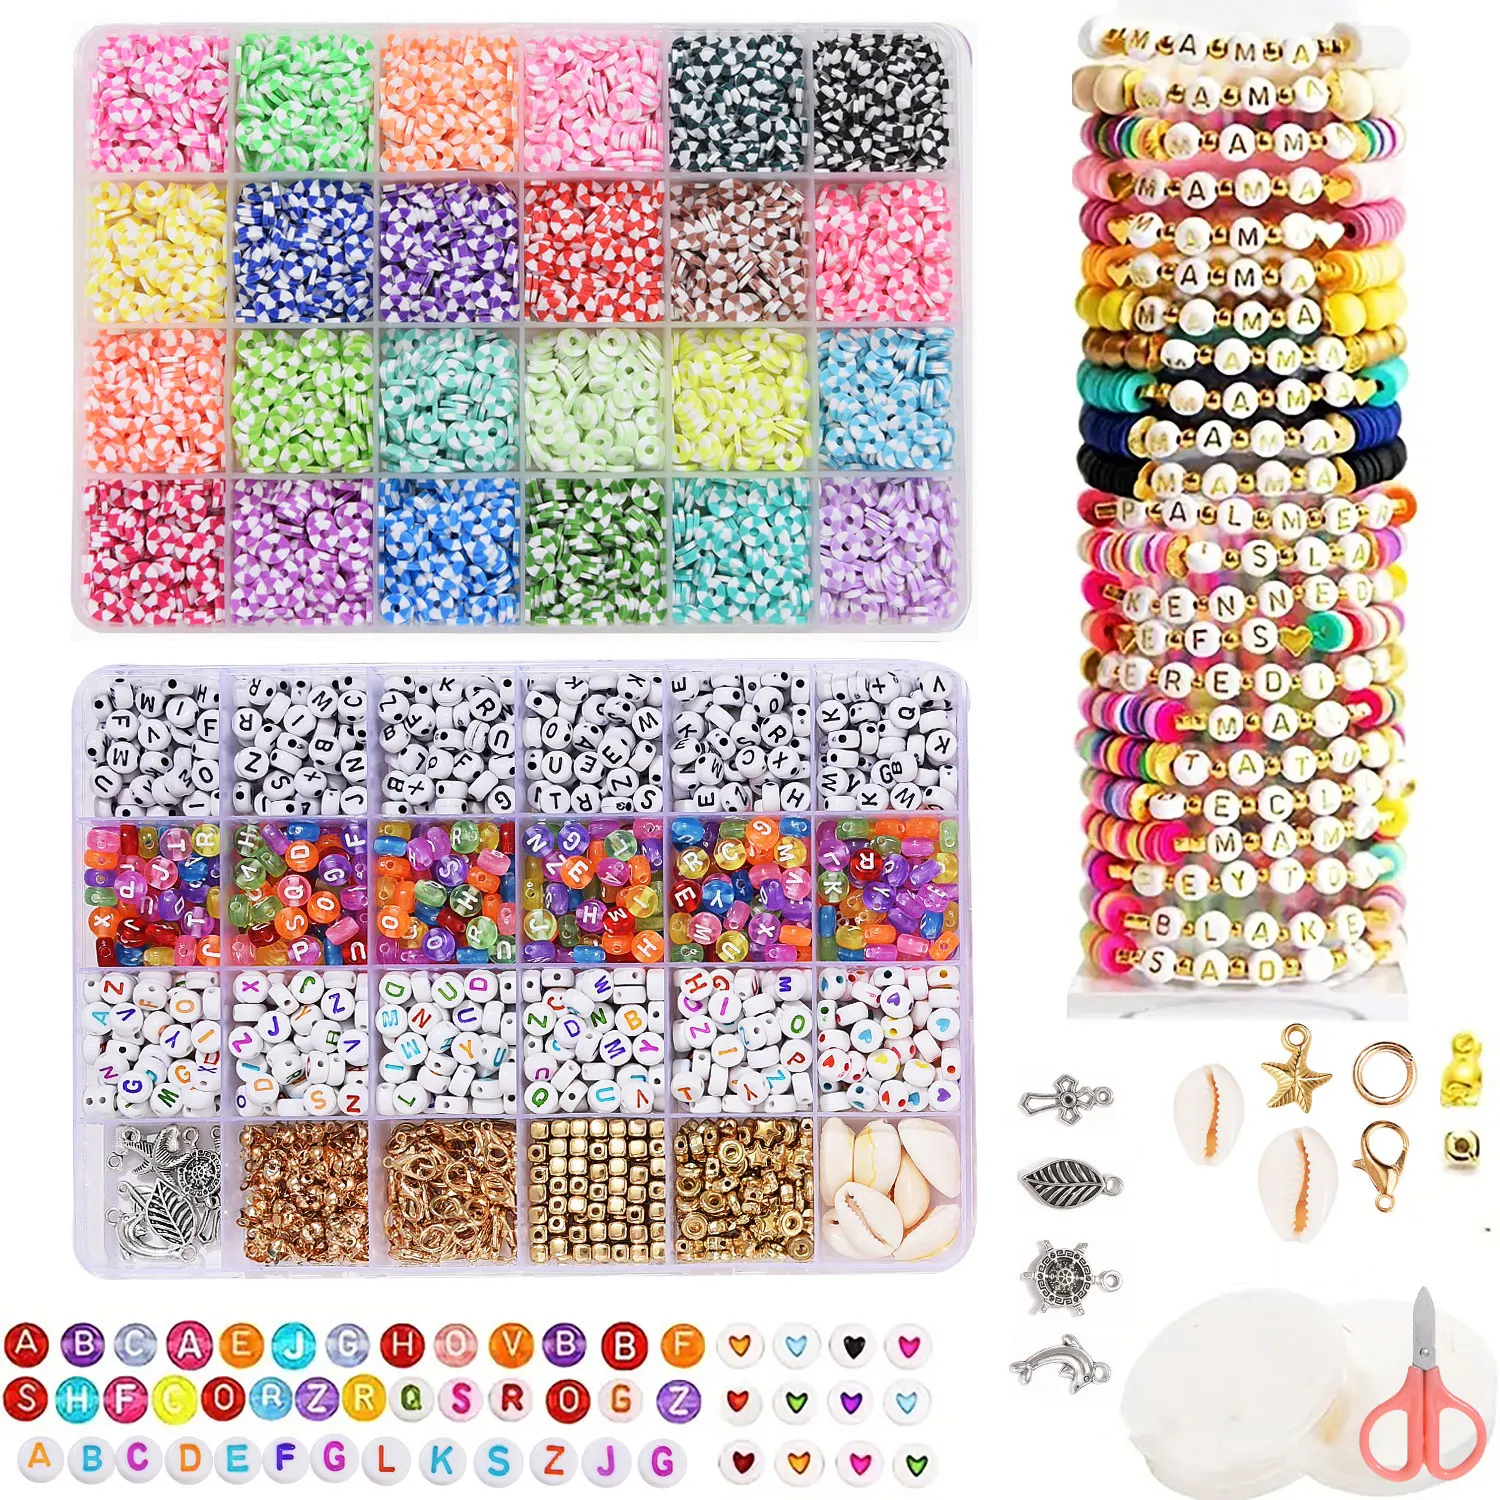 

7000 Pcs Bead Accessories Kit DIY Polymer Clay Beads Set 6MM Rainbow Color Flat Chip Beads Boho Bracelet Necklce Making Letter